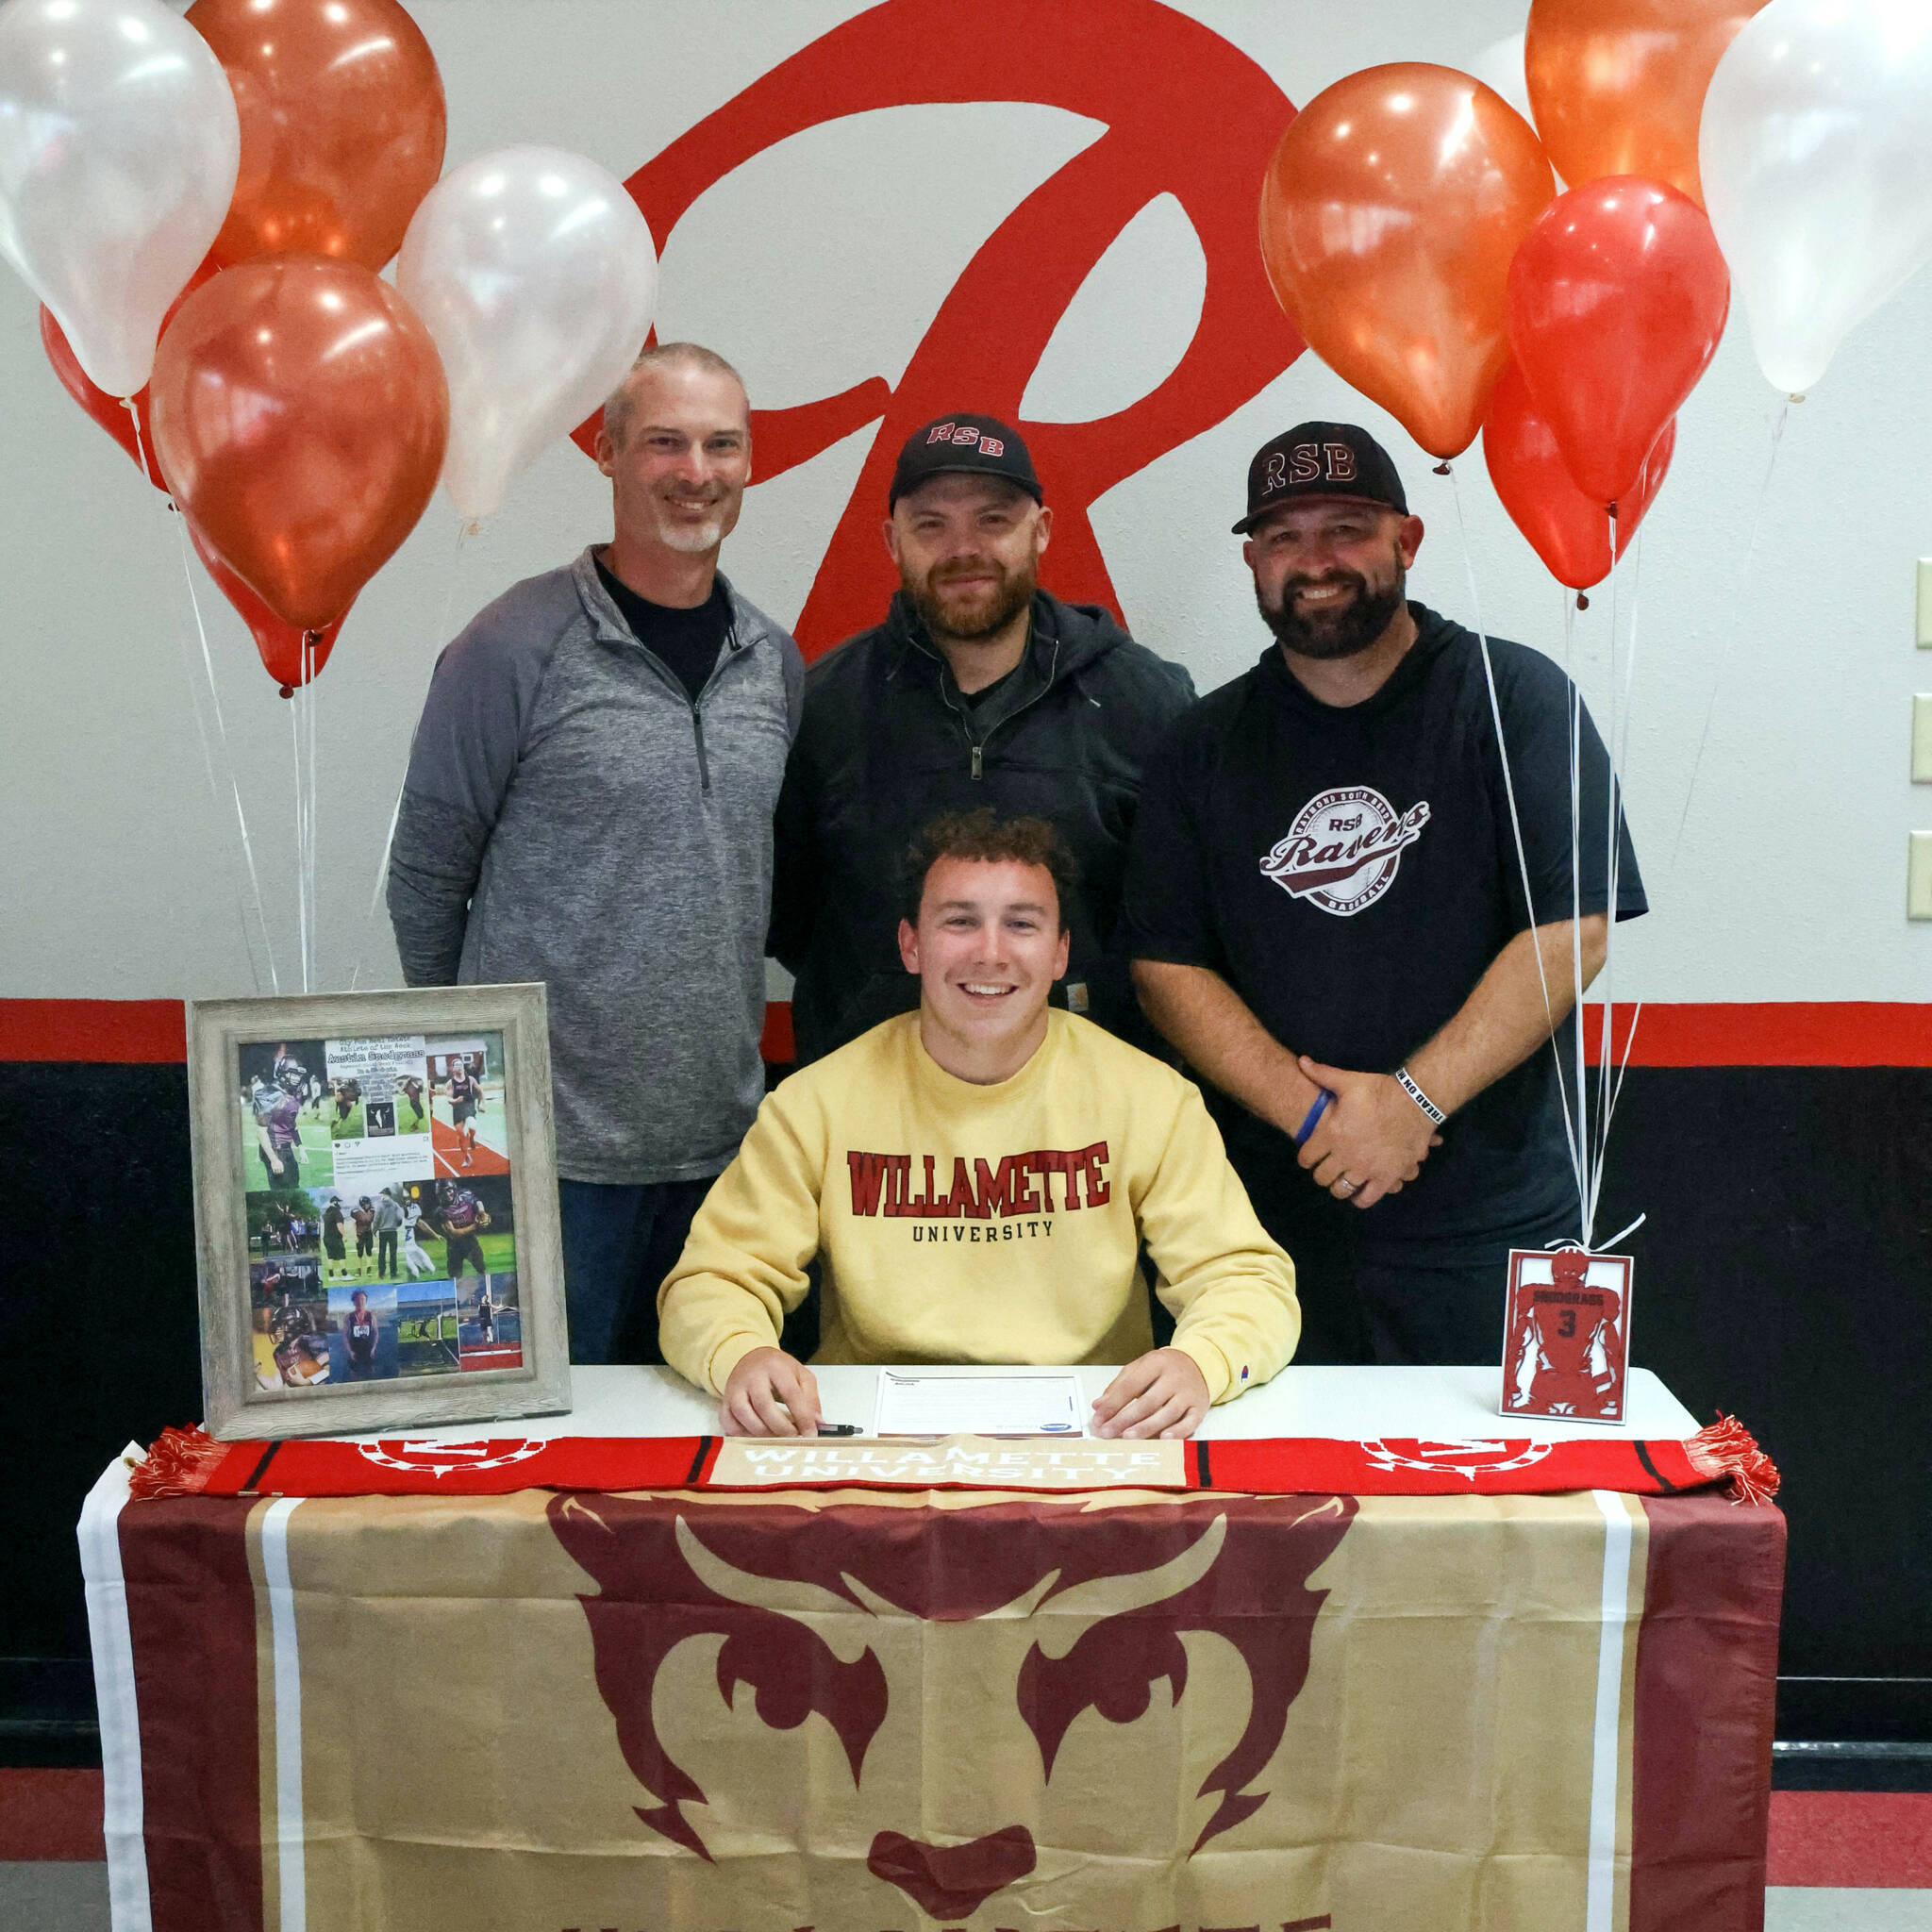 PHOTO BY LARRY BALE Raymond senior Austin Snodgrass (sitting) signed a Letter of Intent to compete in both football and track and field at Willamette University in the fall. Pictured with Snodgrass is (from left) Raymond athletic director Mike Tully and coaches Ken Minks and Luke Abbott.